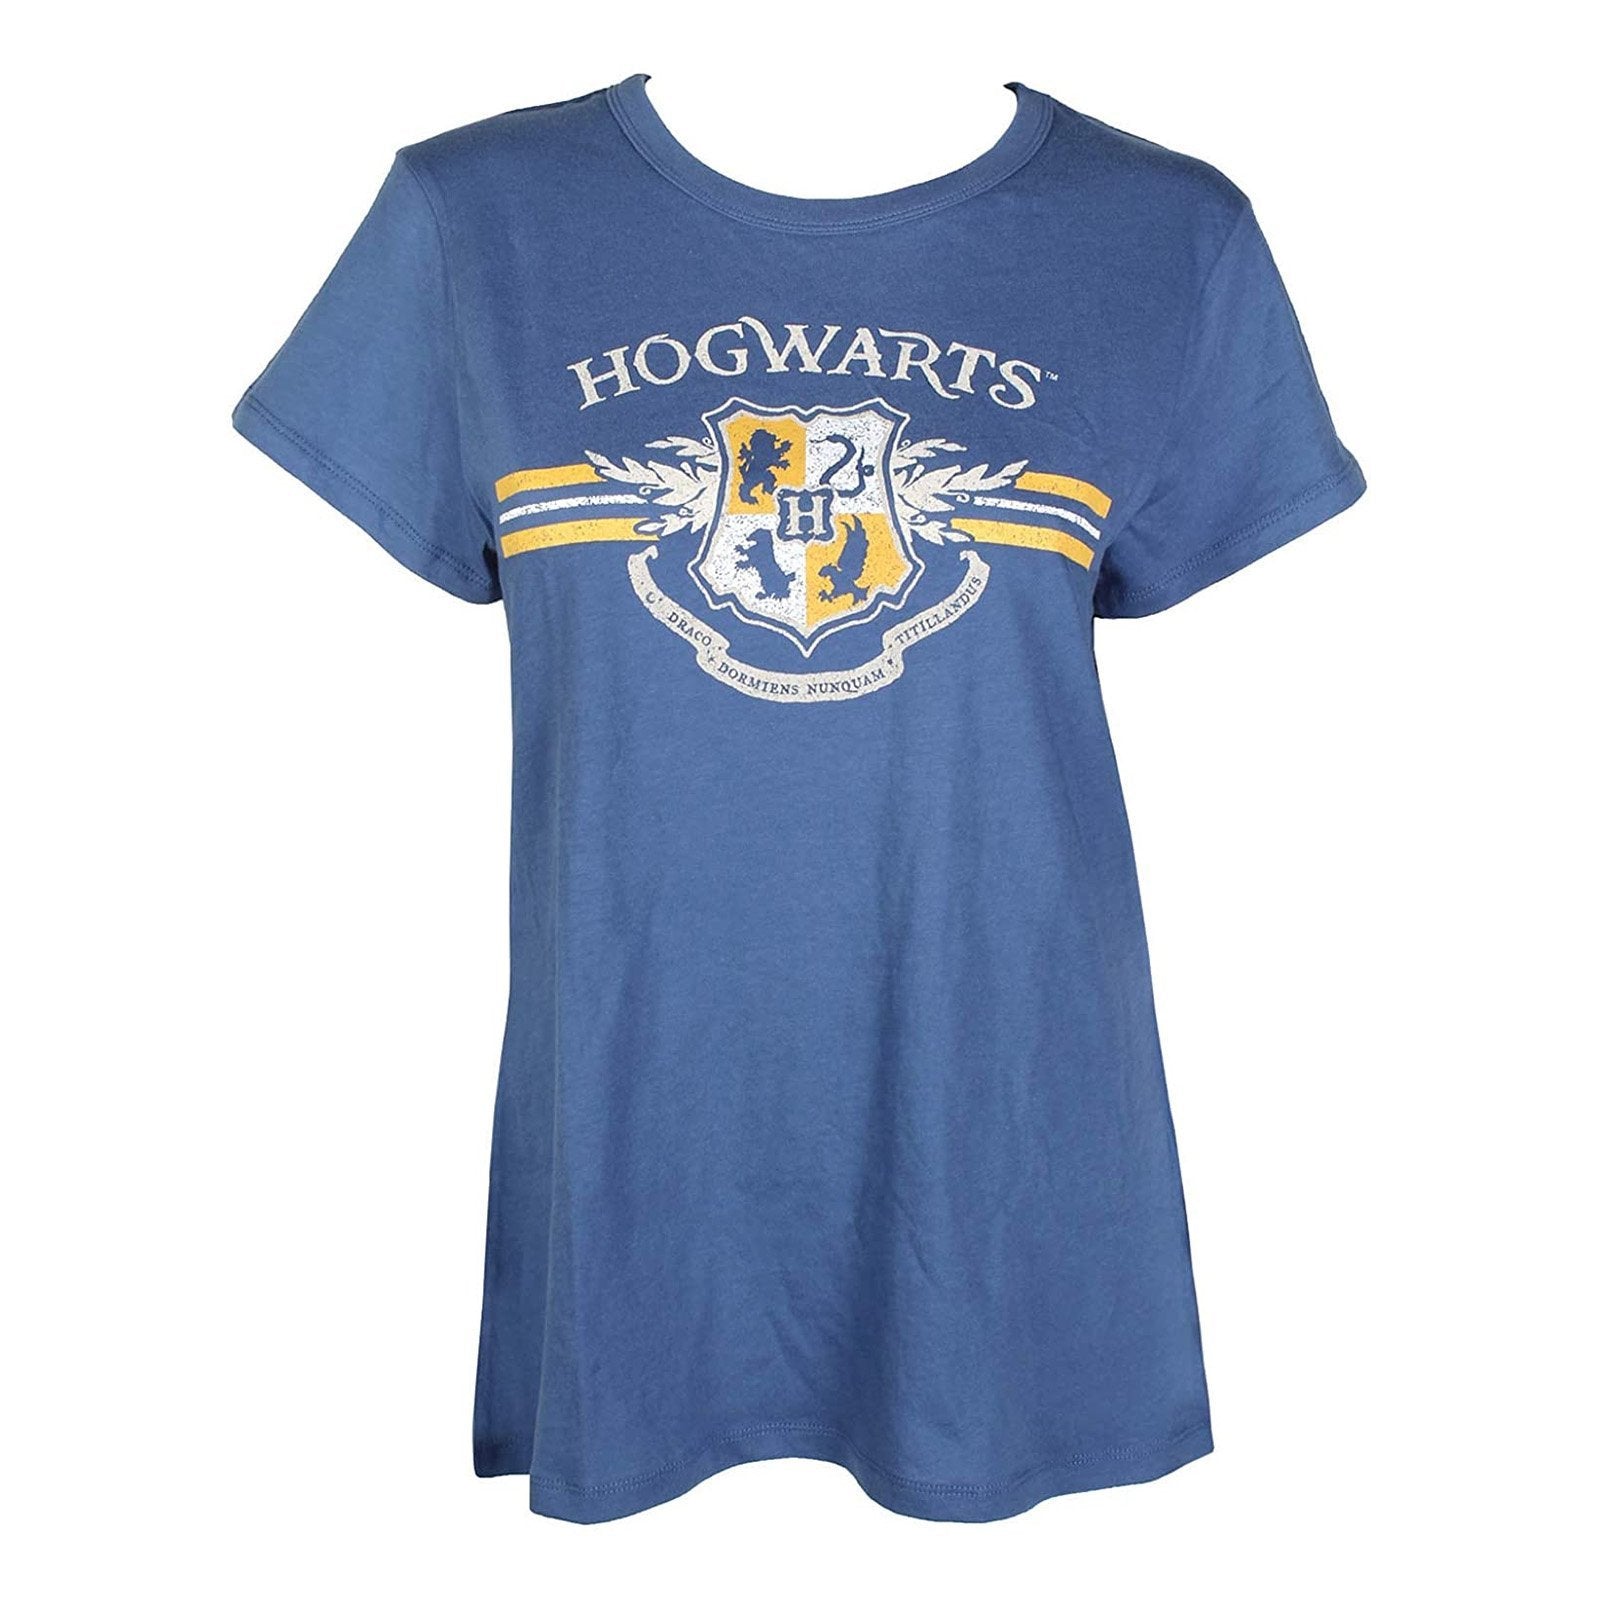 Crest T-shirts, Harry Potter Licensed T-Shirt Tee Graphic Inc. Wholesale Sporting Junior\'s Products Blue Rex and goods, Hogwarts – Distributor, Women